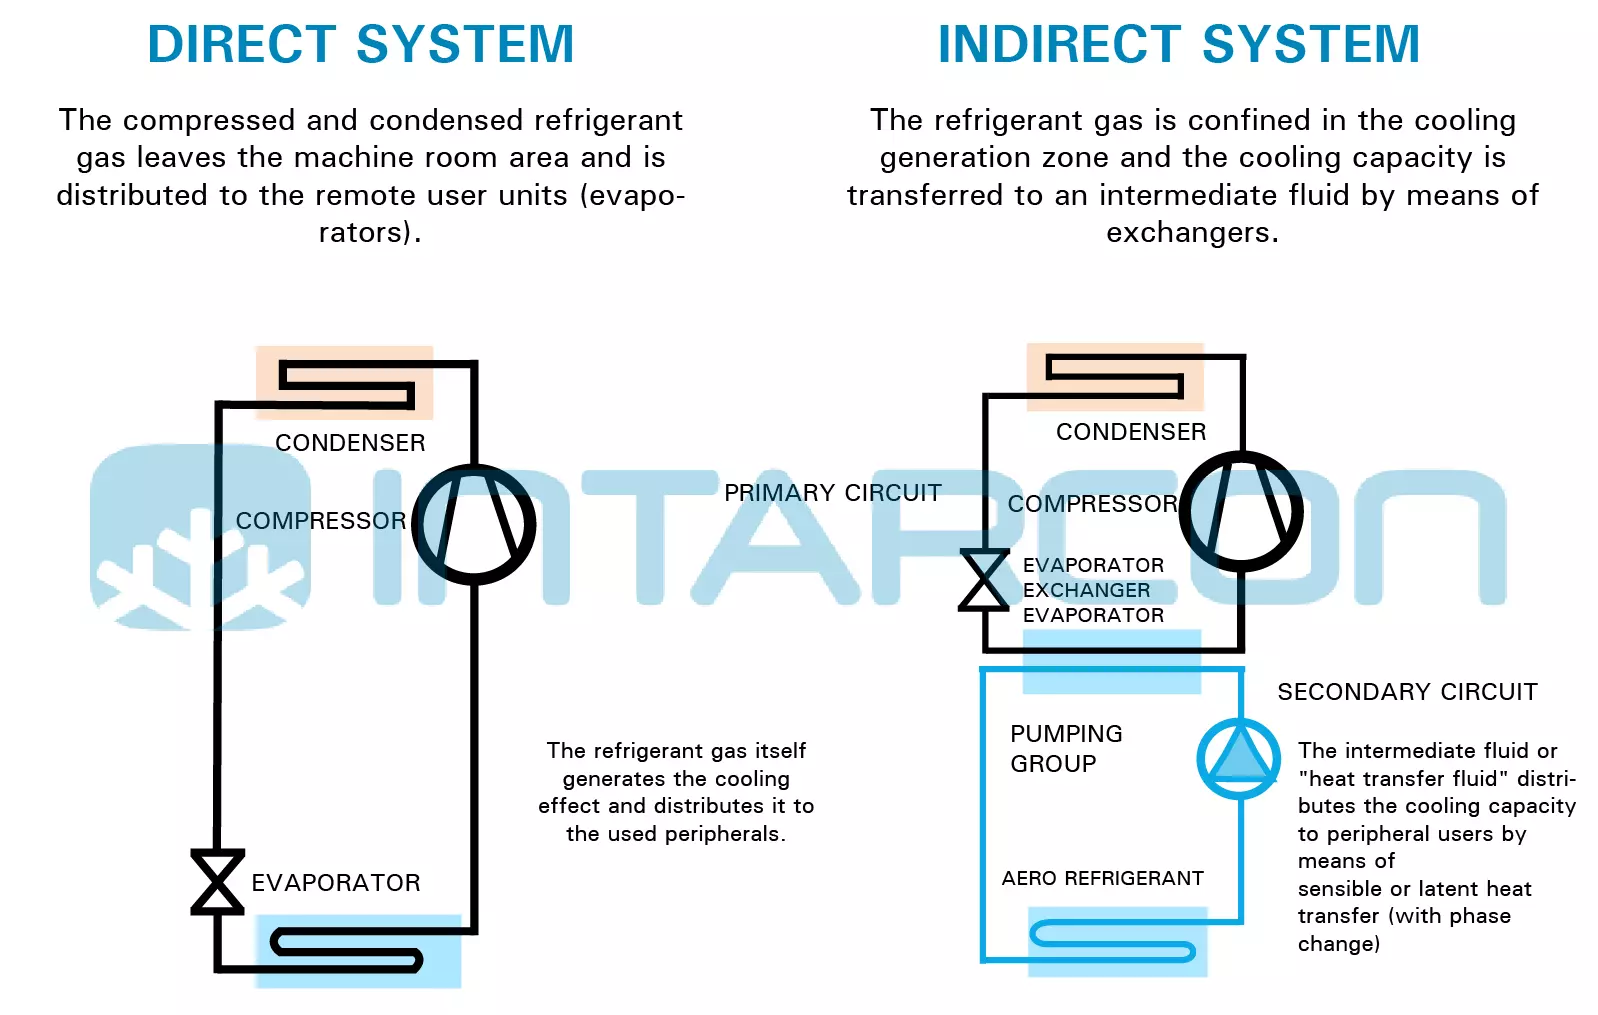 Direct and indirect systems - INTARCON